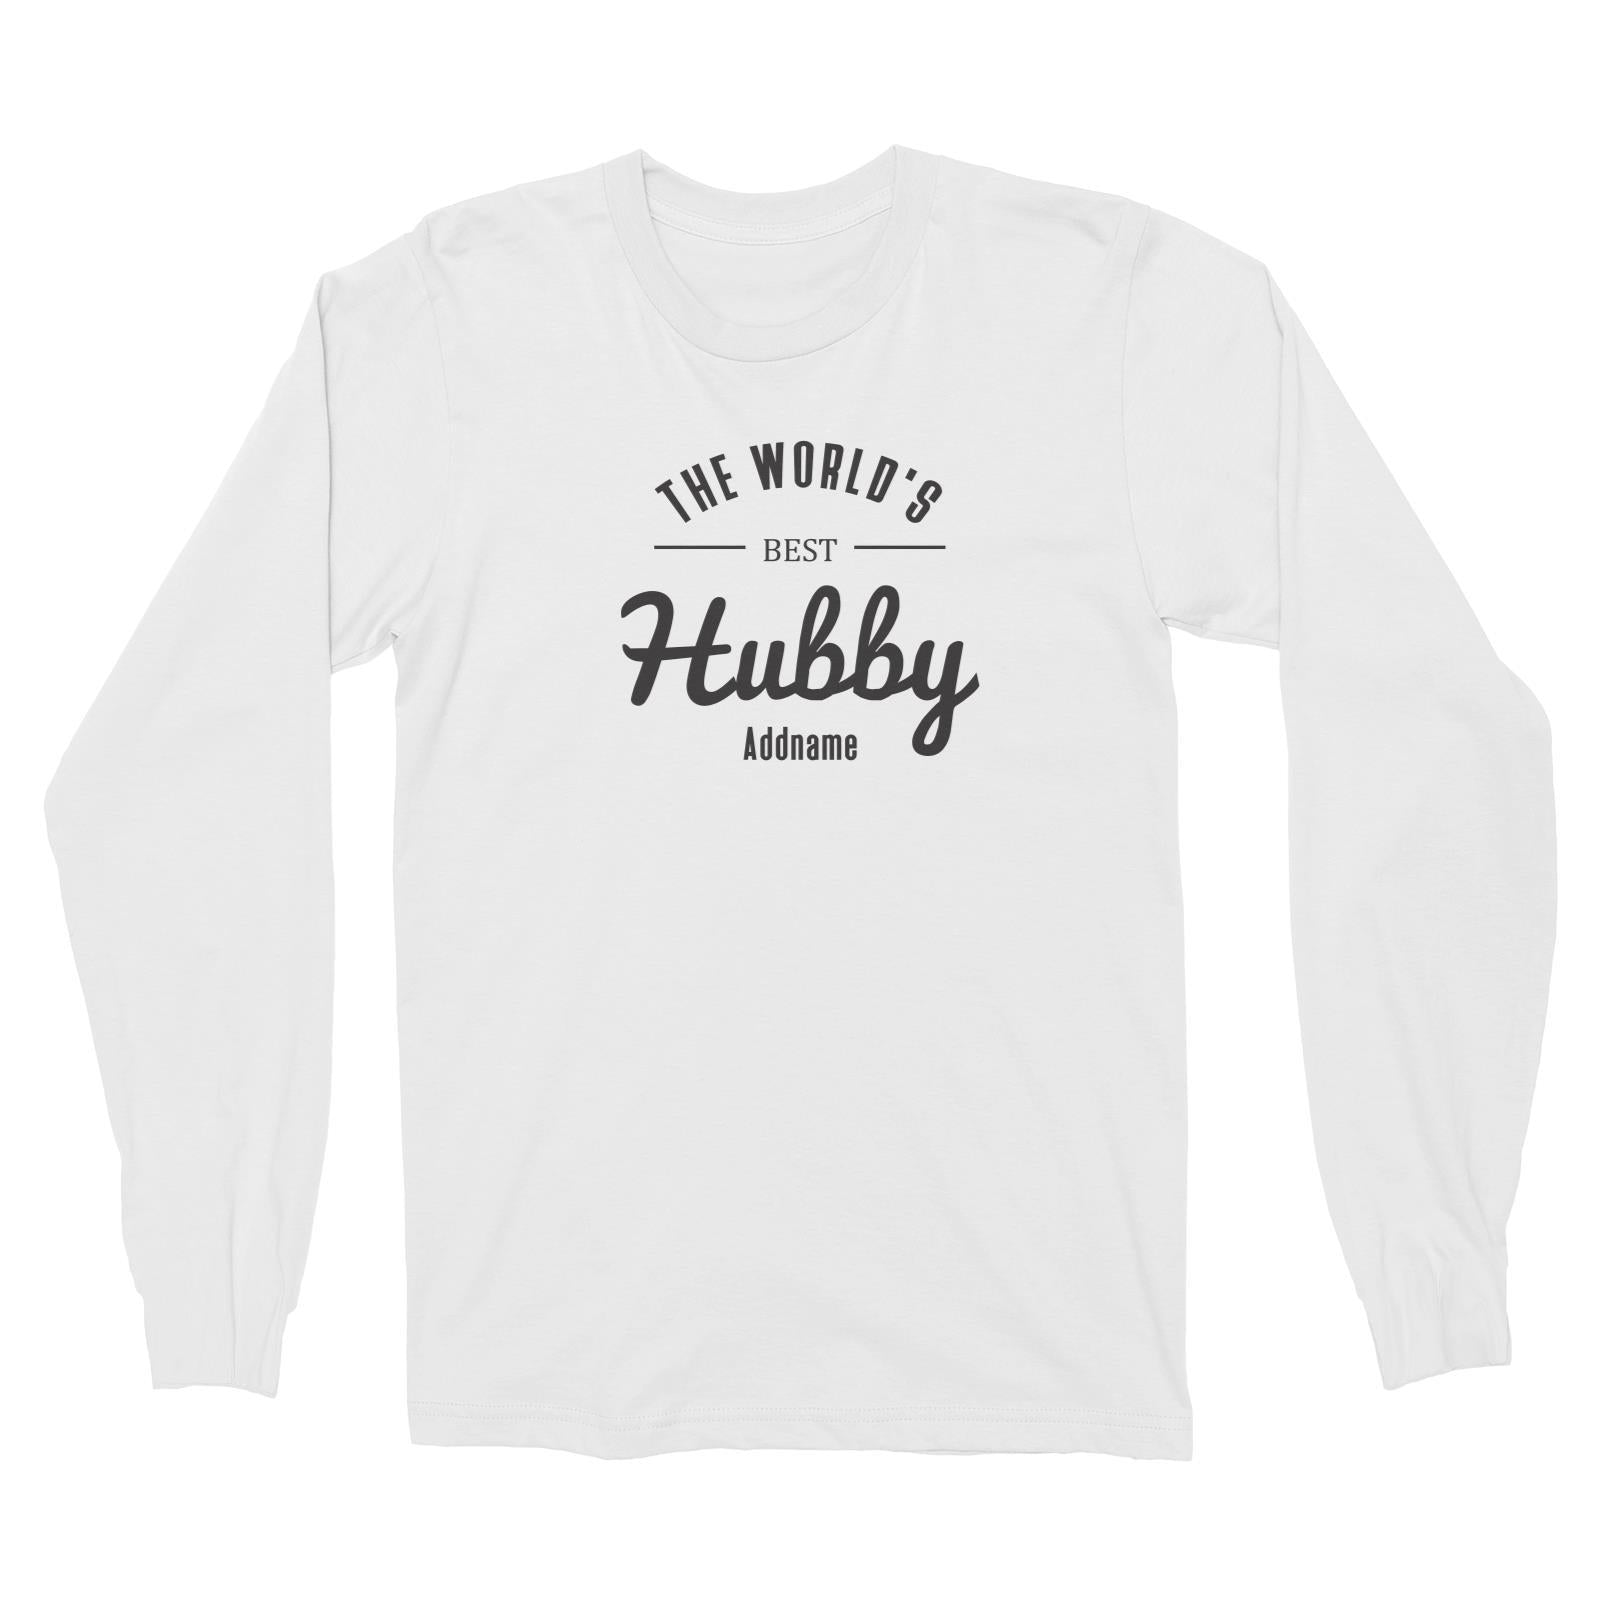 Husband and Wife The World's Best Hubby Addname Long Sleeve Unisex T-Shirt